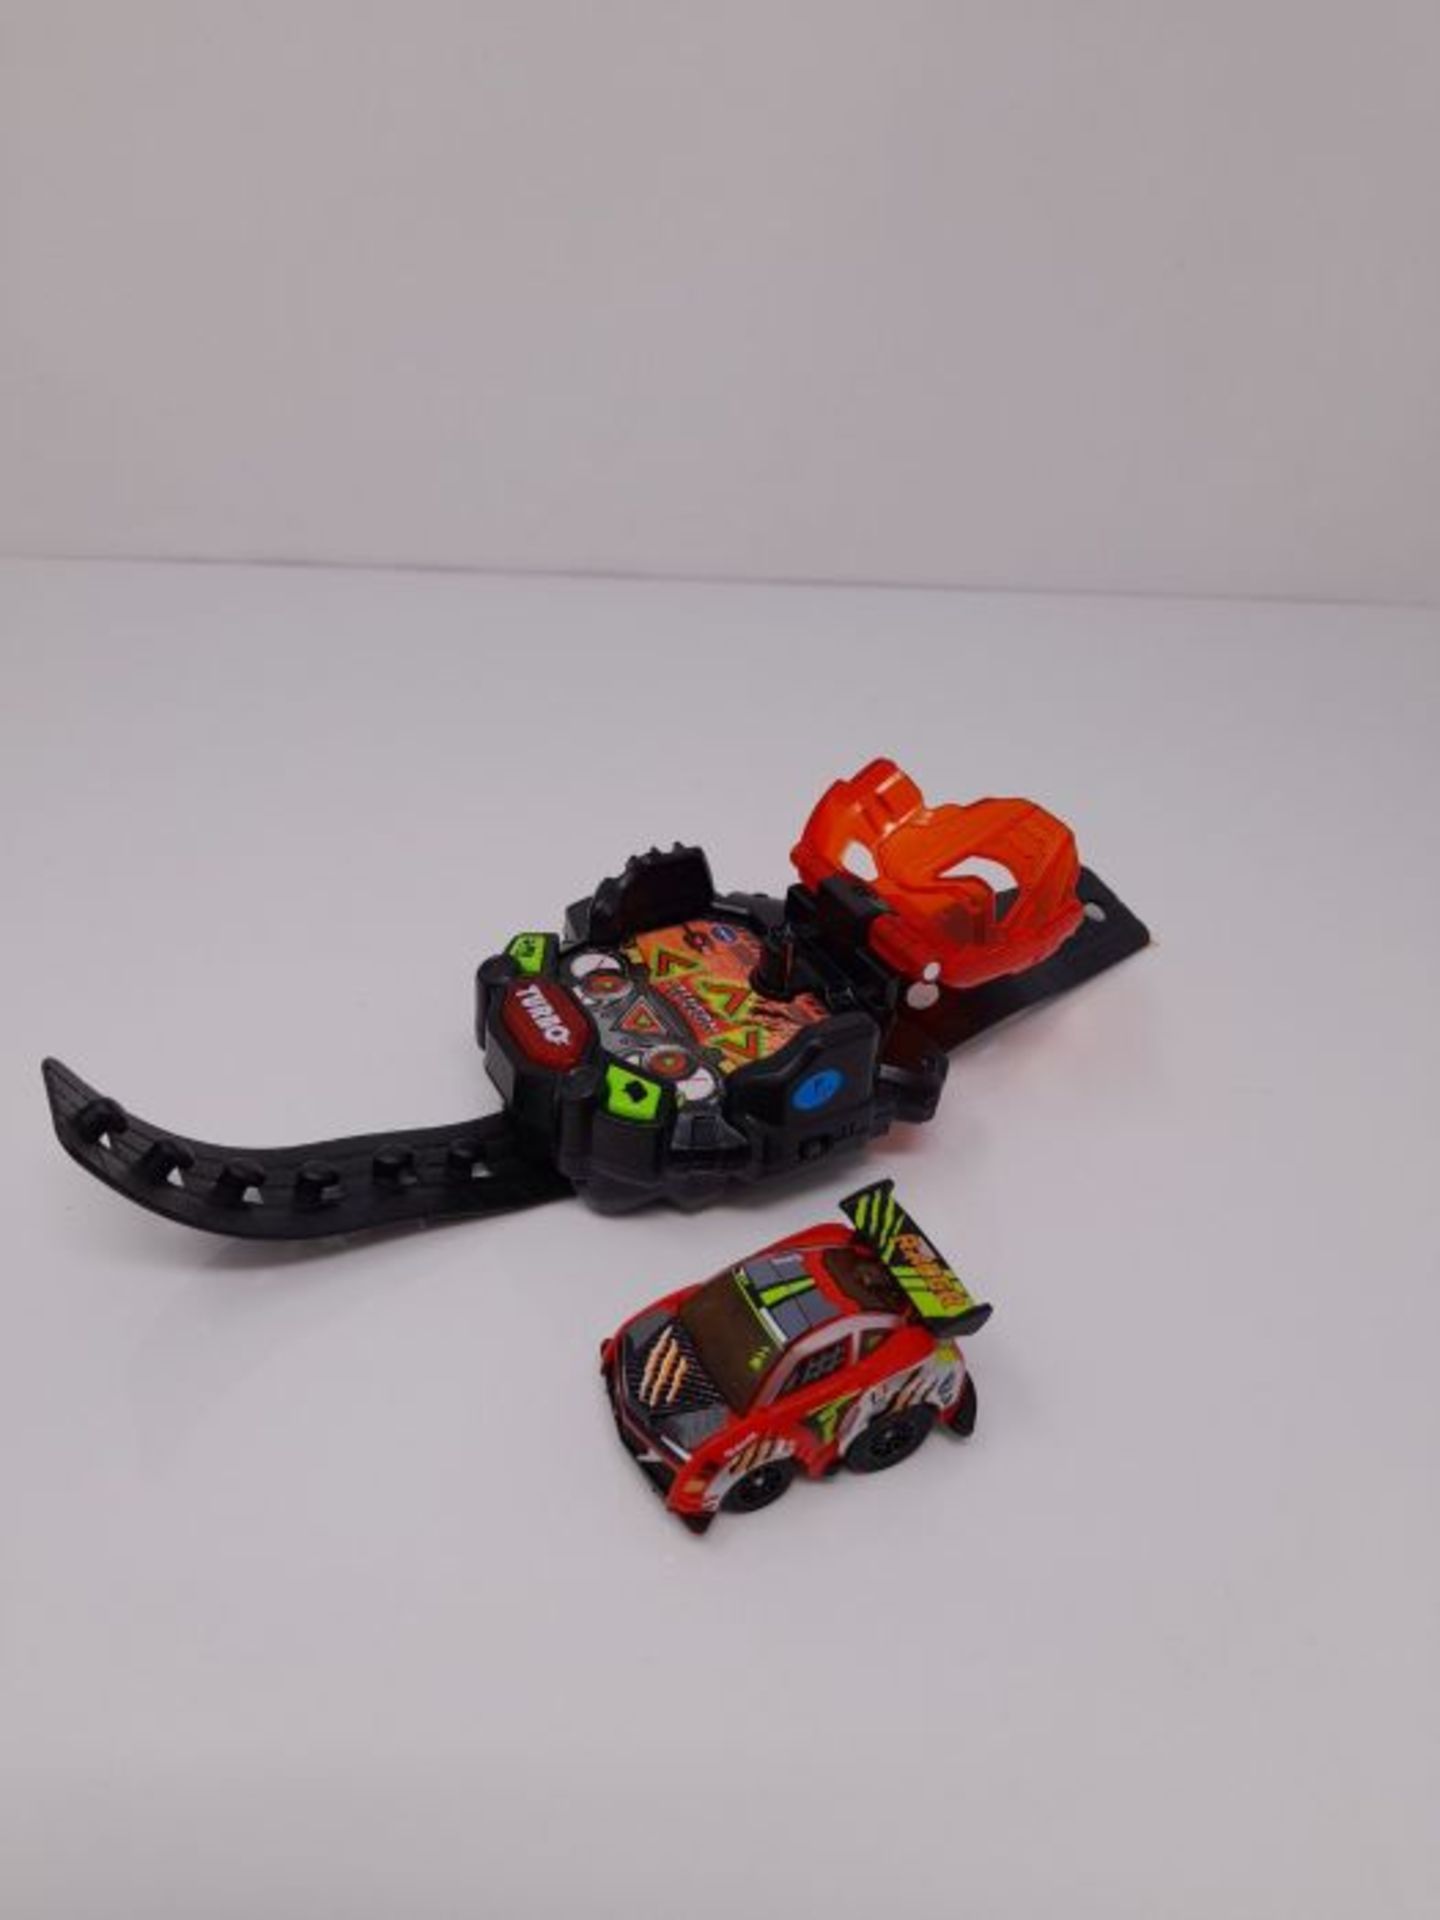 Vtech 80-198204 Remote Controlled car, red - Image 3 of 3